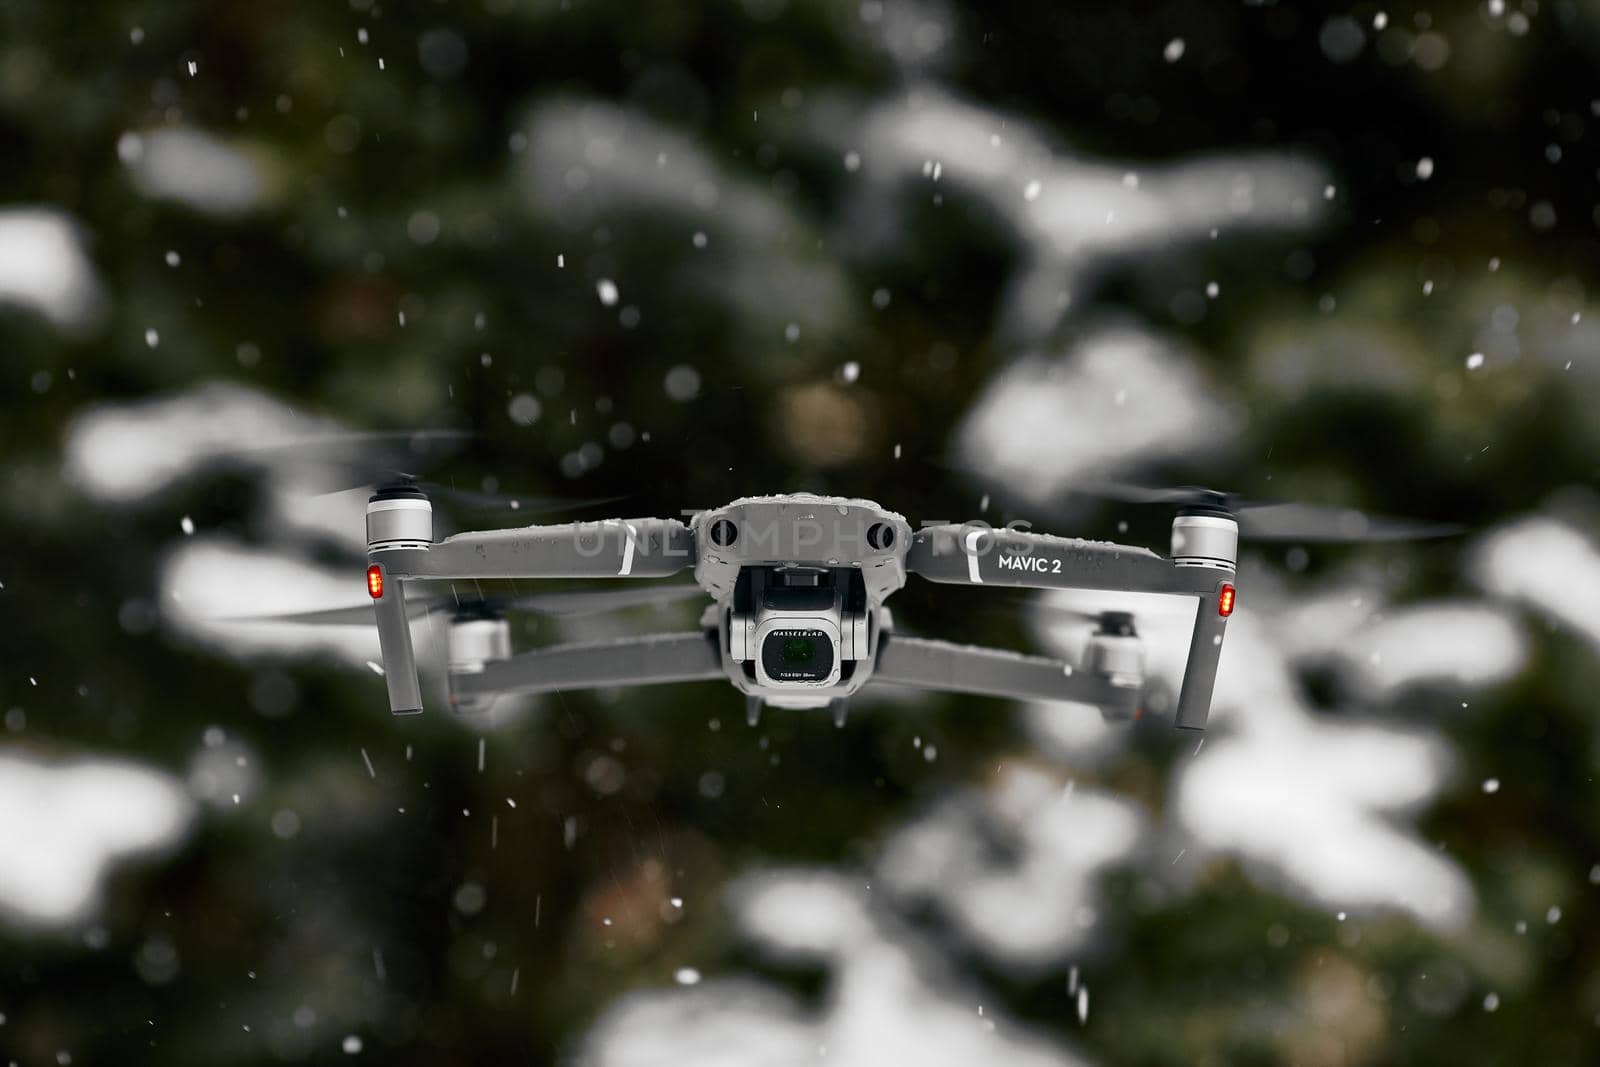 DJI Mavic 2 Pro, flying in wet snow conditions. DJI Mavic 2 Pro one of the most portable drones in the market, with Hasselblad camera. 07.12.2018 Rostov-on-Don, Russia by EvgeniyQW